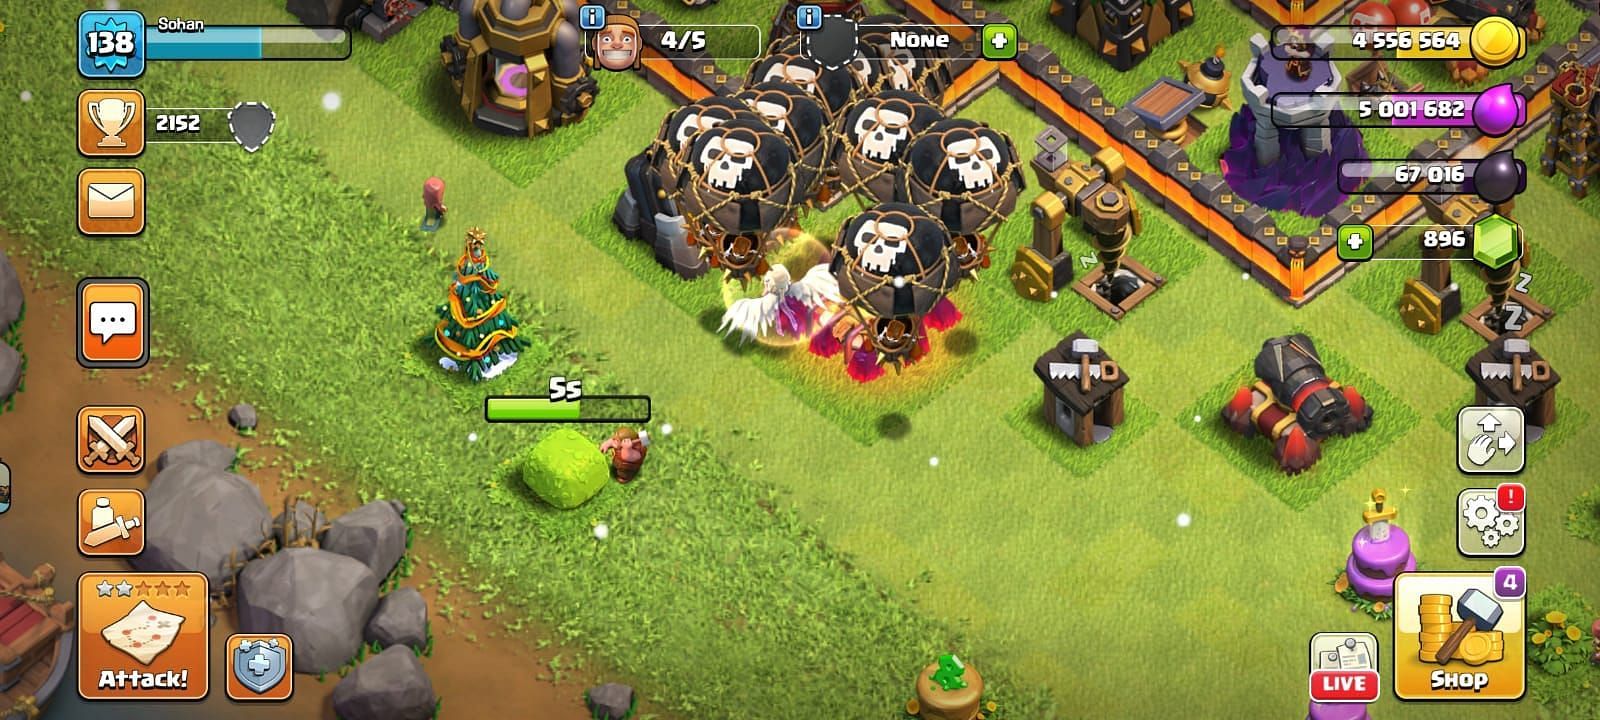 Removing Obstacles (Image via Supercell)